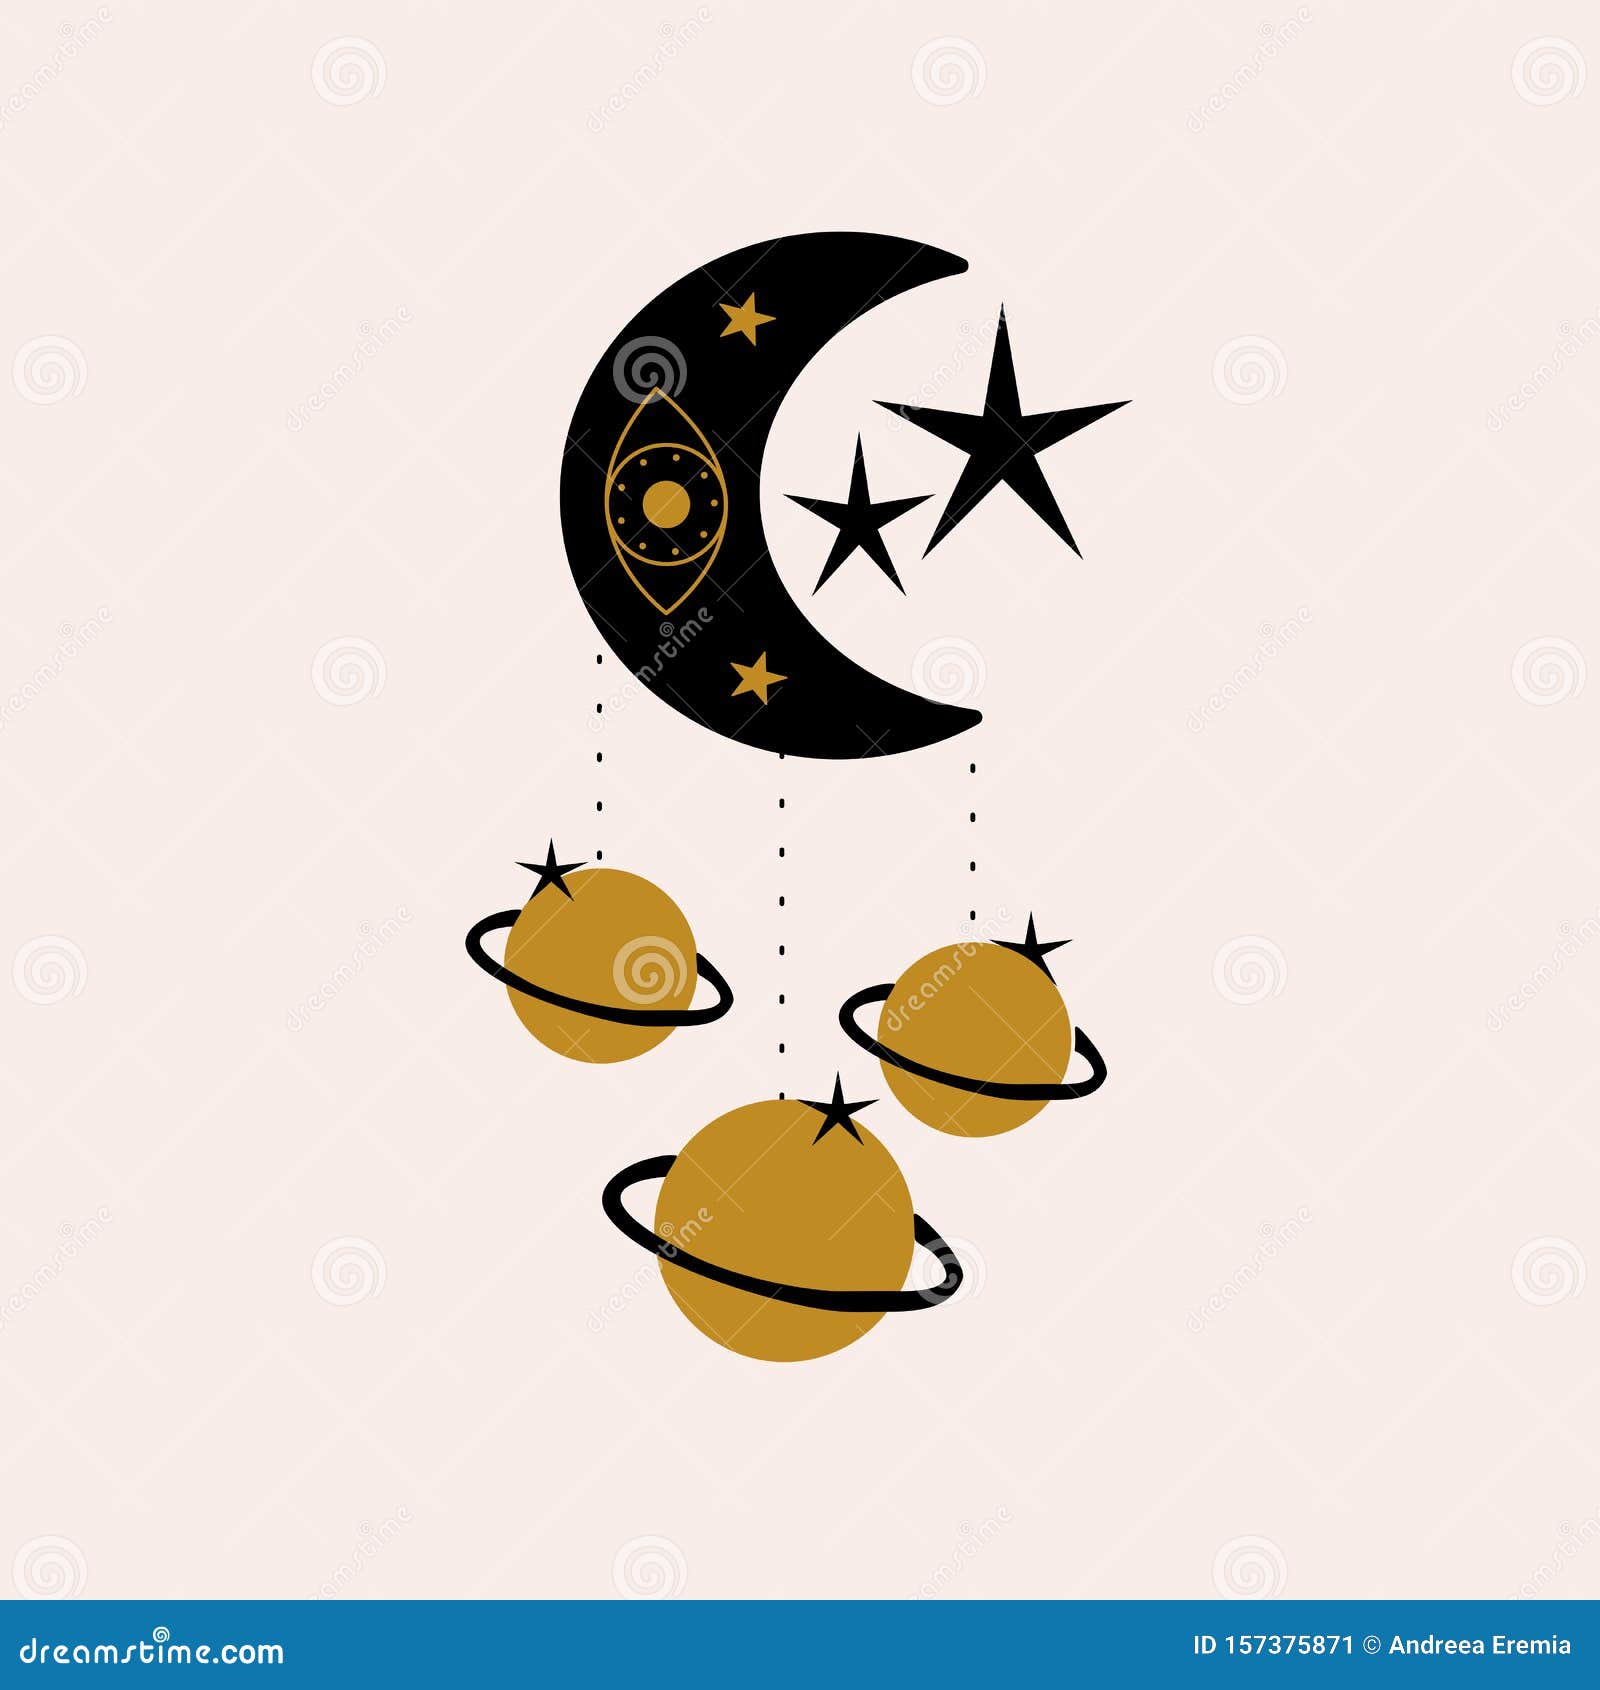 Celestial golden crescent moon pattern with face Vector Image